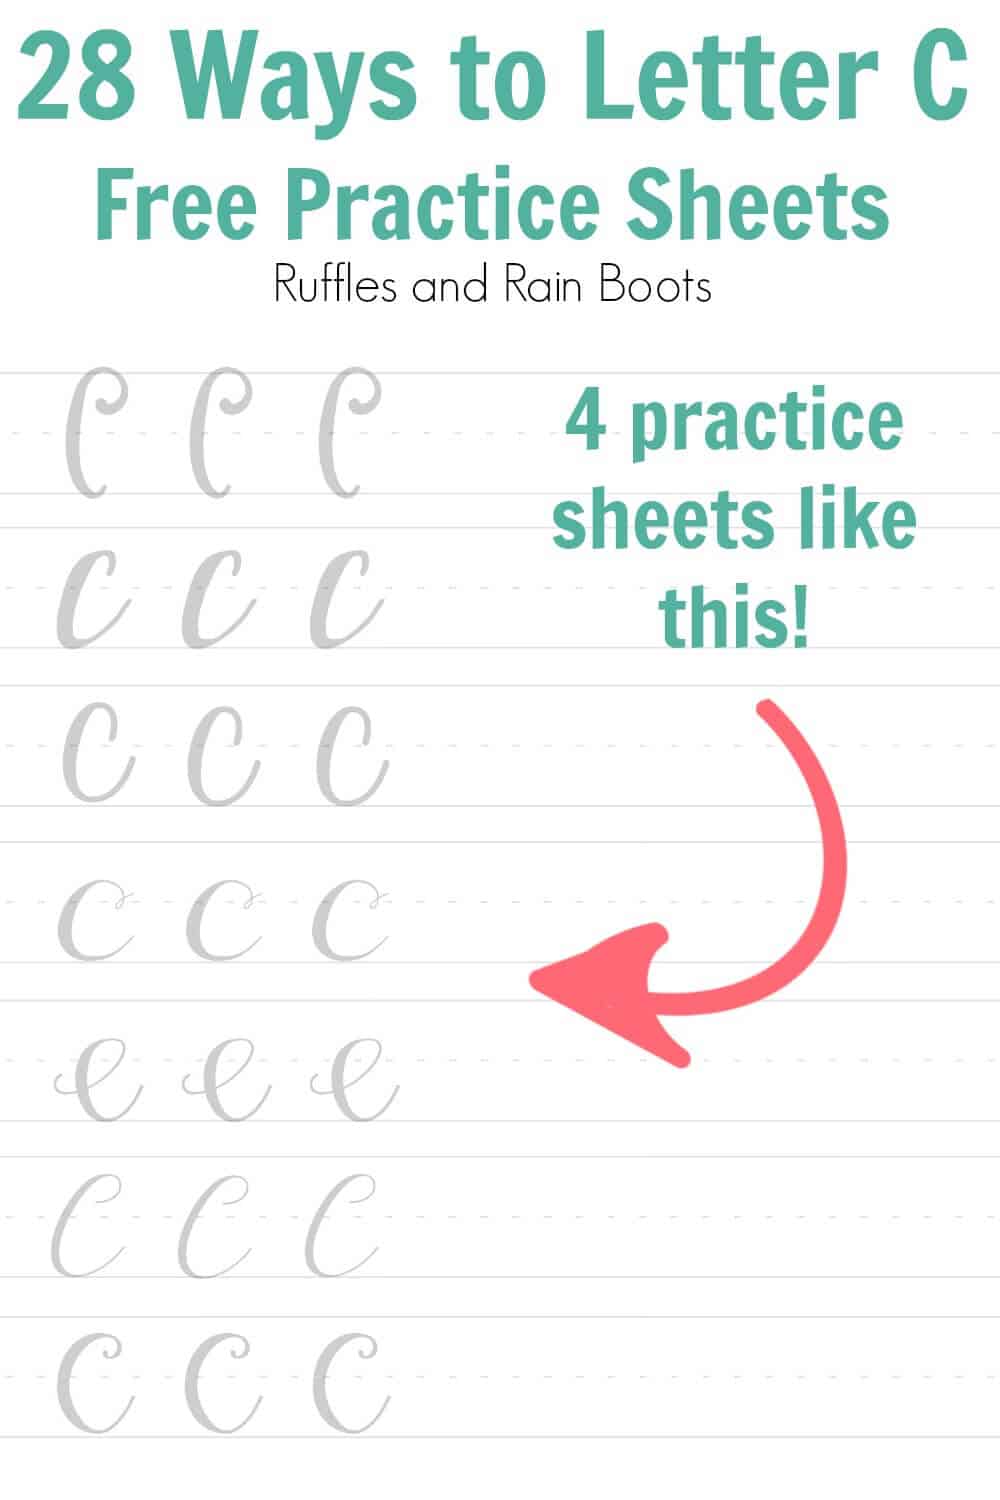 Example image of the printable ways to letter C free brush lettering practice sheets with large pink arrow.